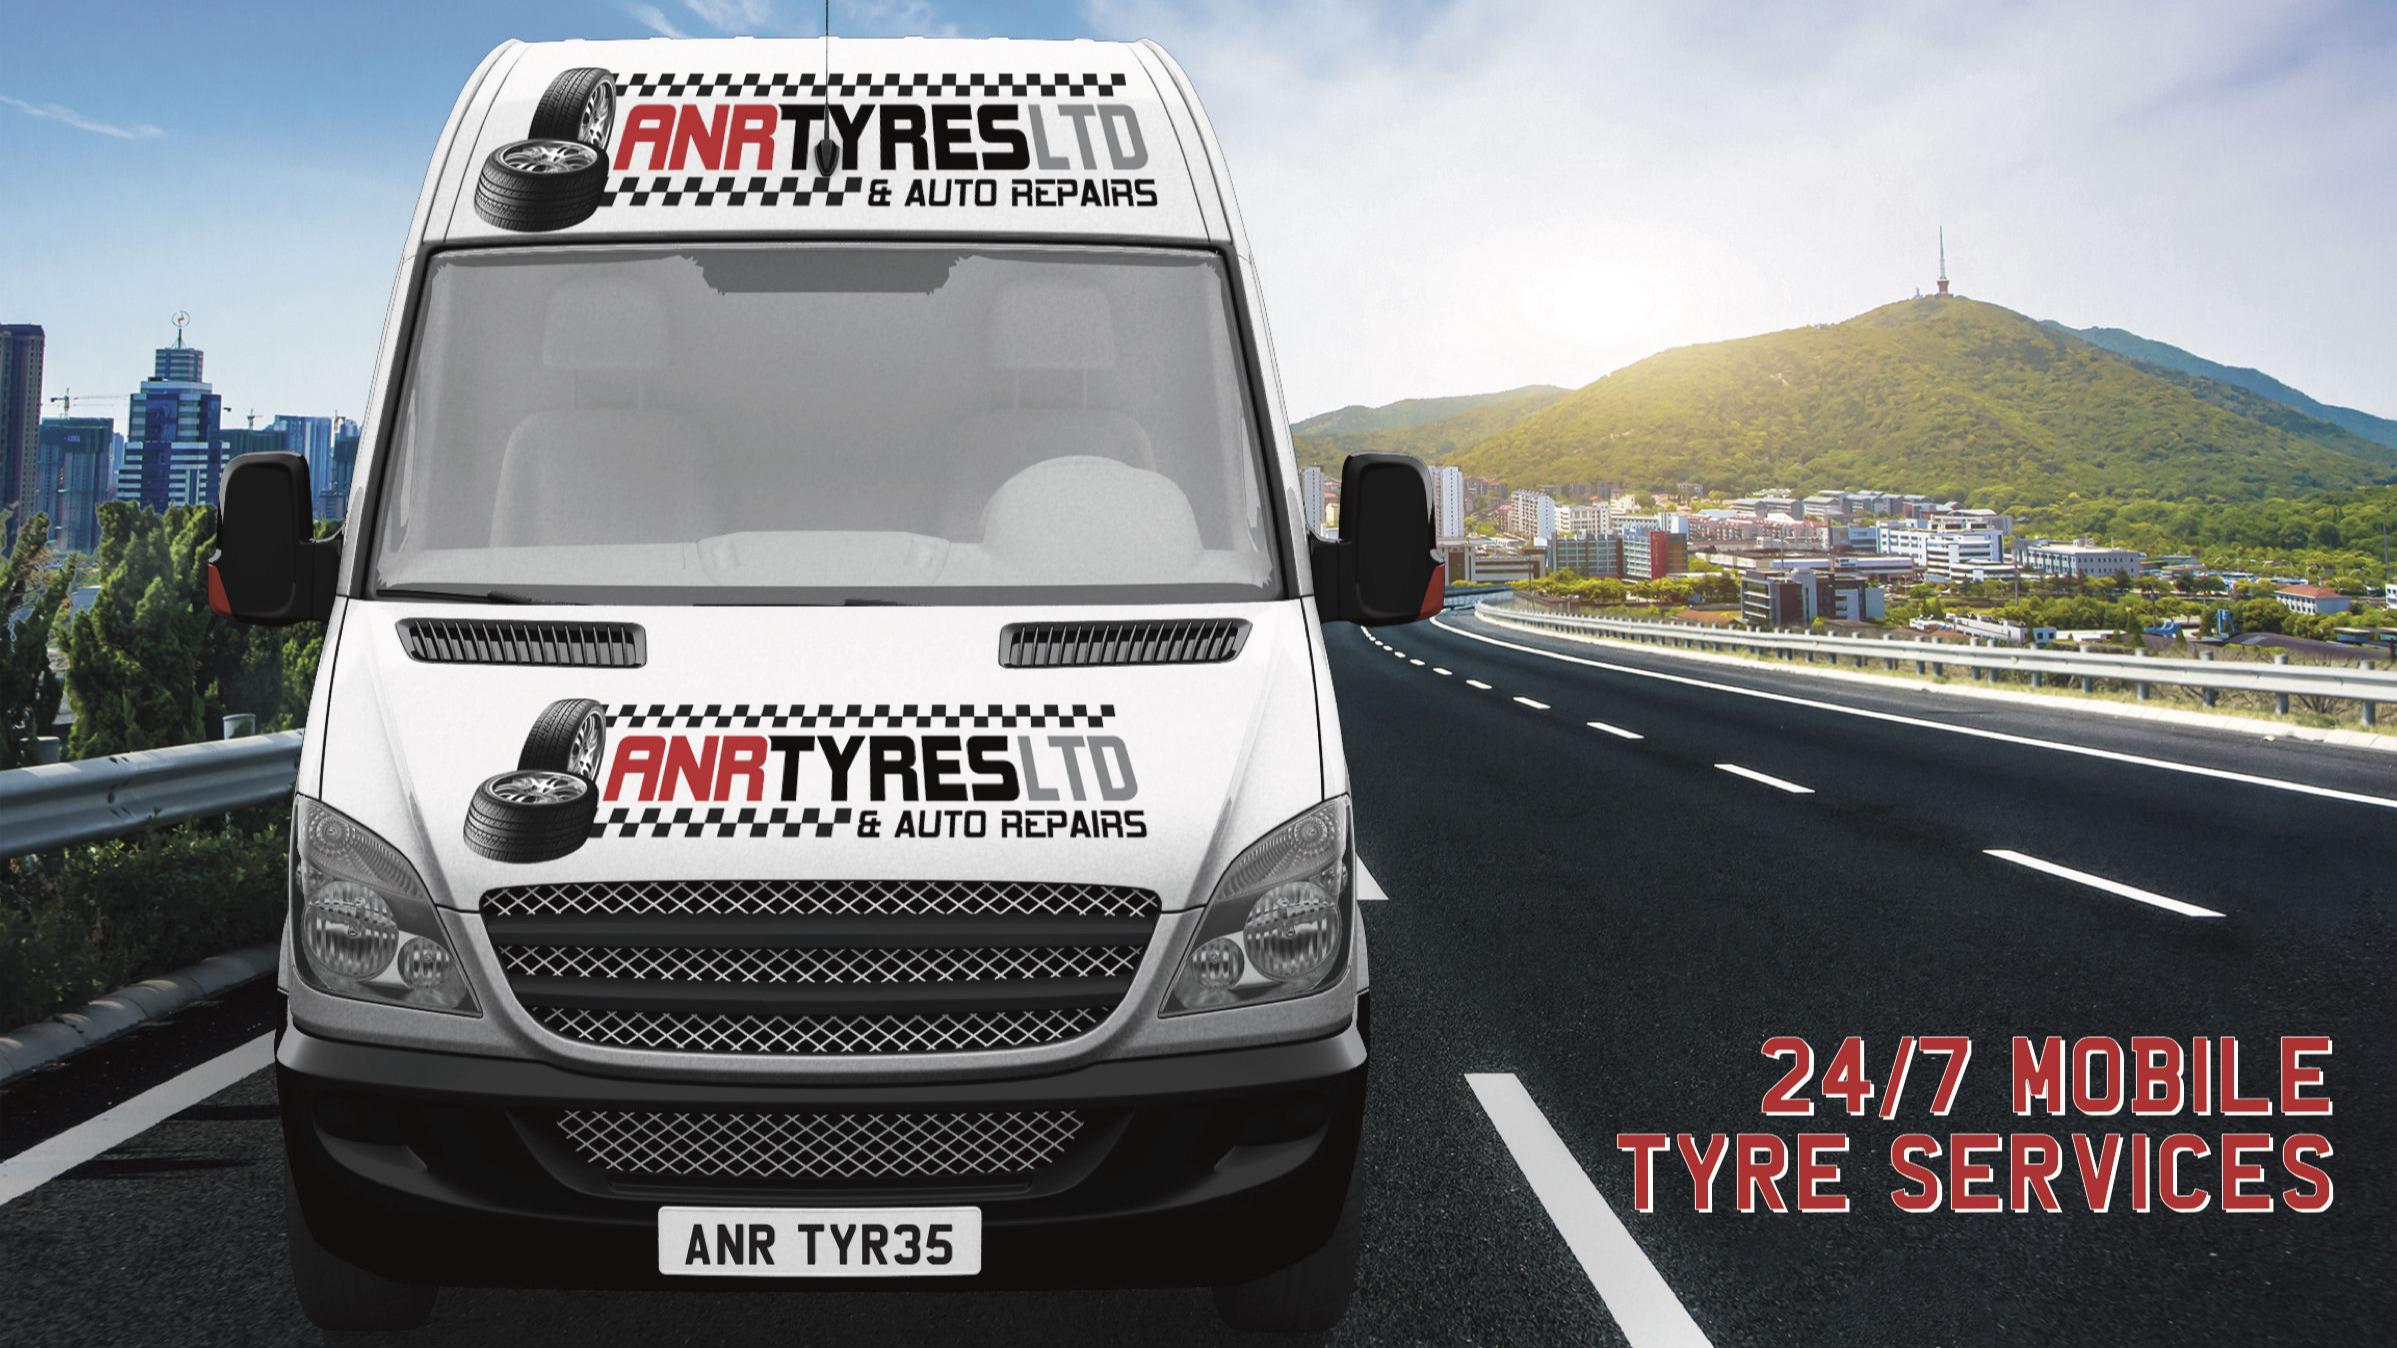 ANR TYRES LIMITED MOBILE TYRE FITTING IN RAINHAM